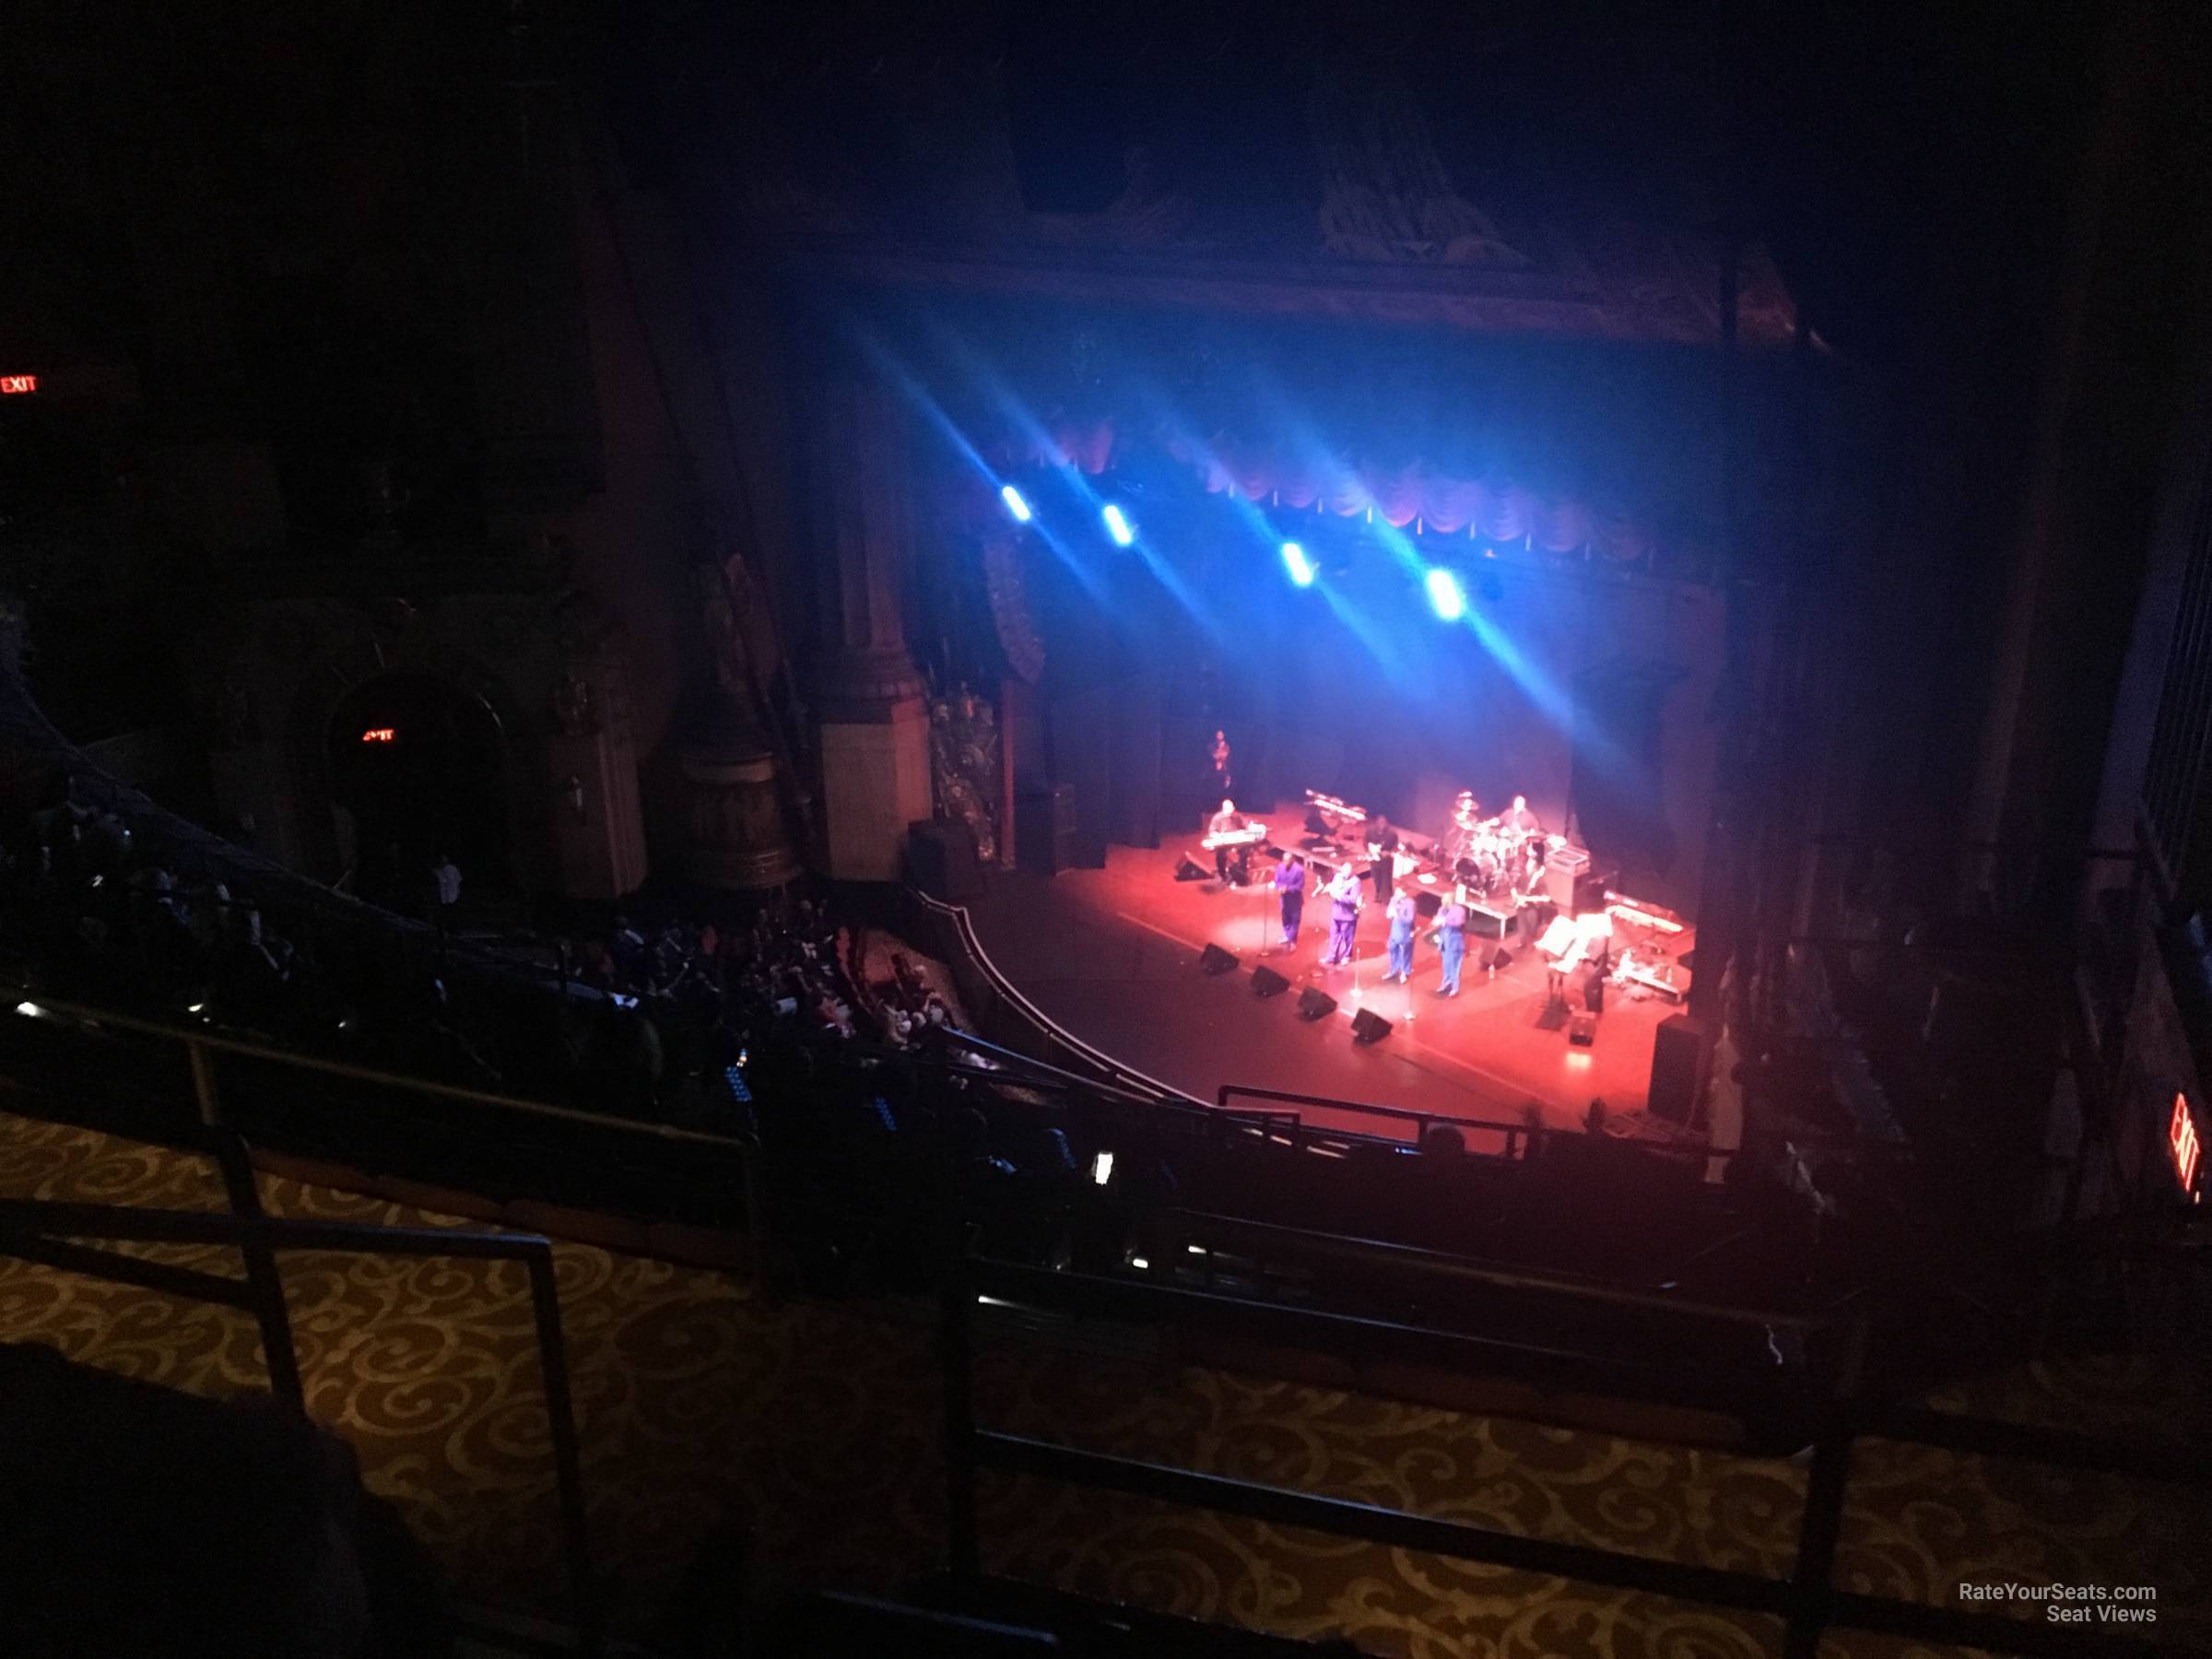 Bank Theater Seating Chart Obstructed View